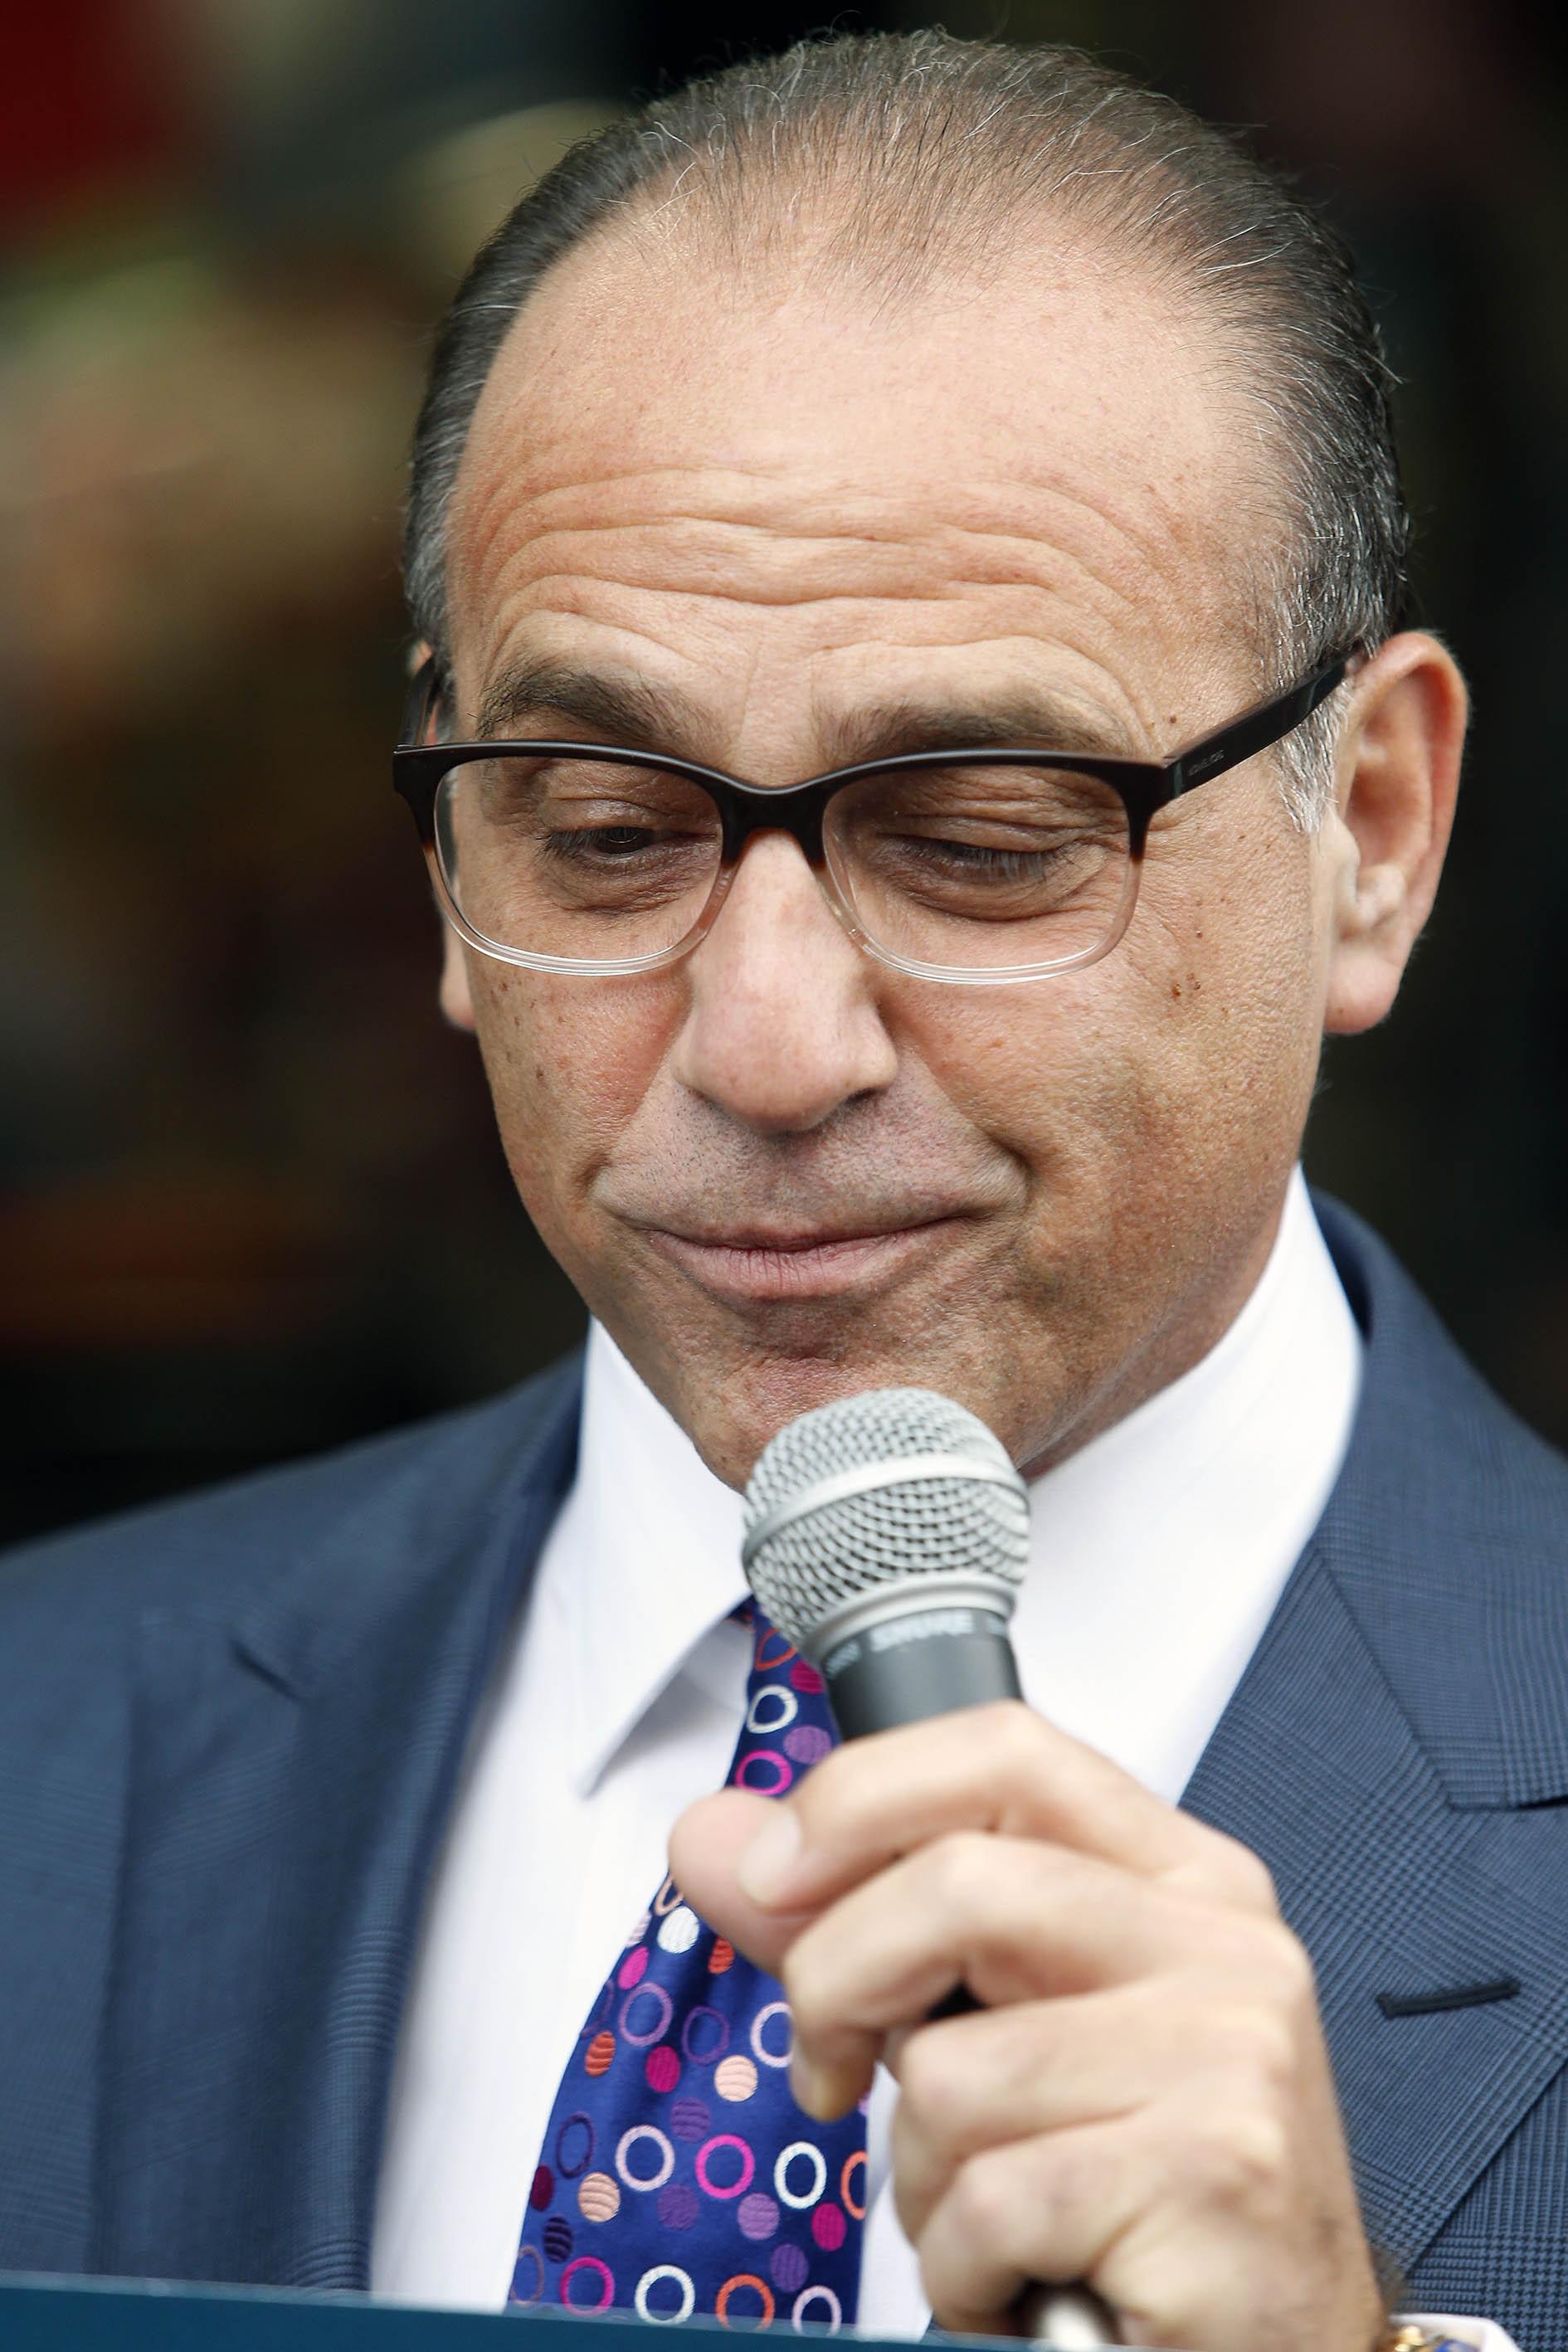 Dragons Den star Theo Paphitis opens Robert Dyas store in Edgware - 3385715